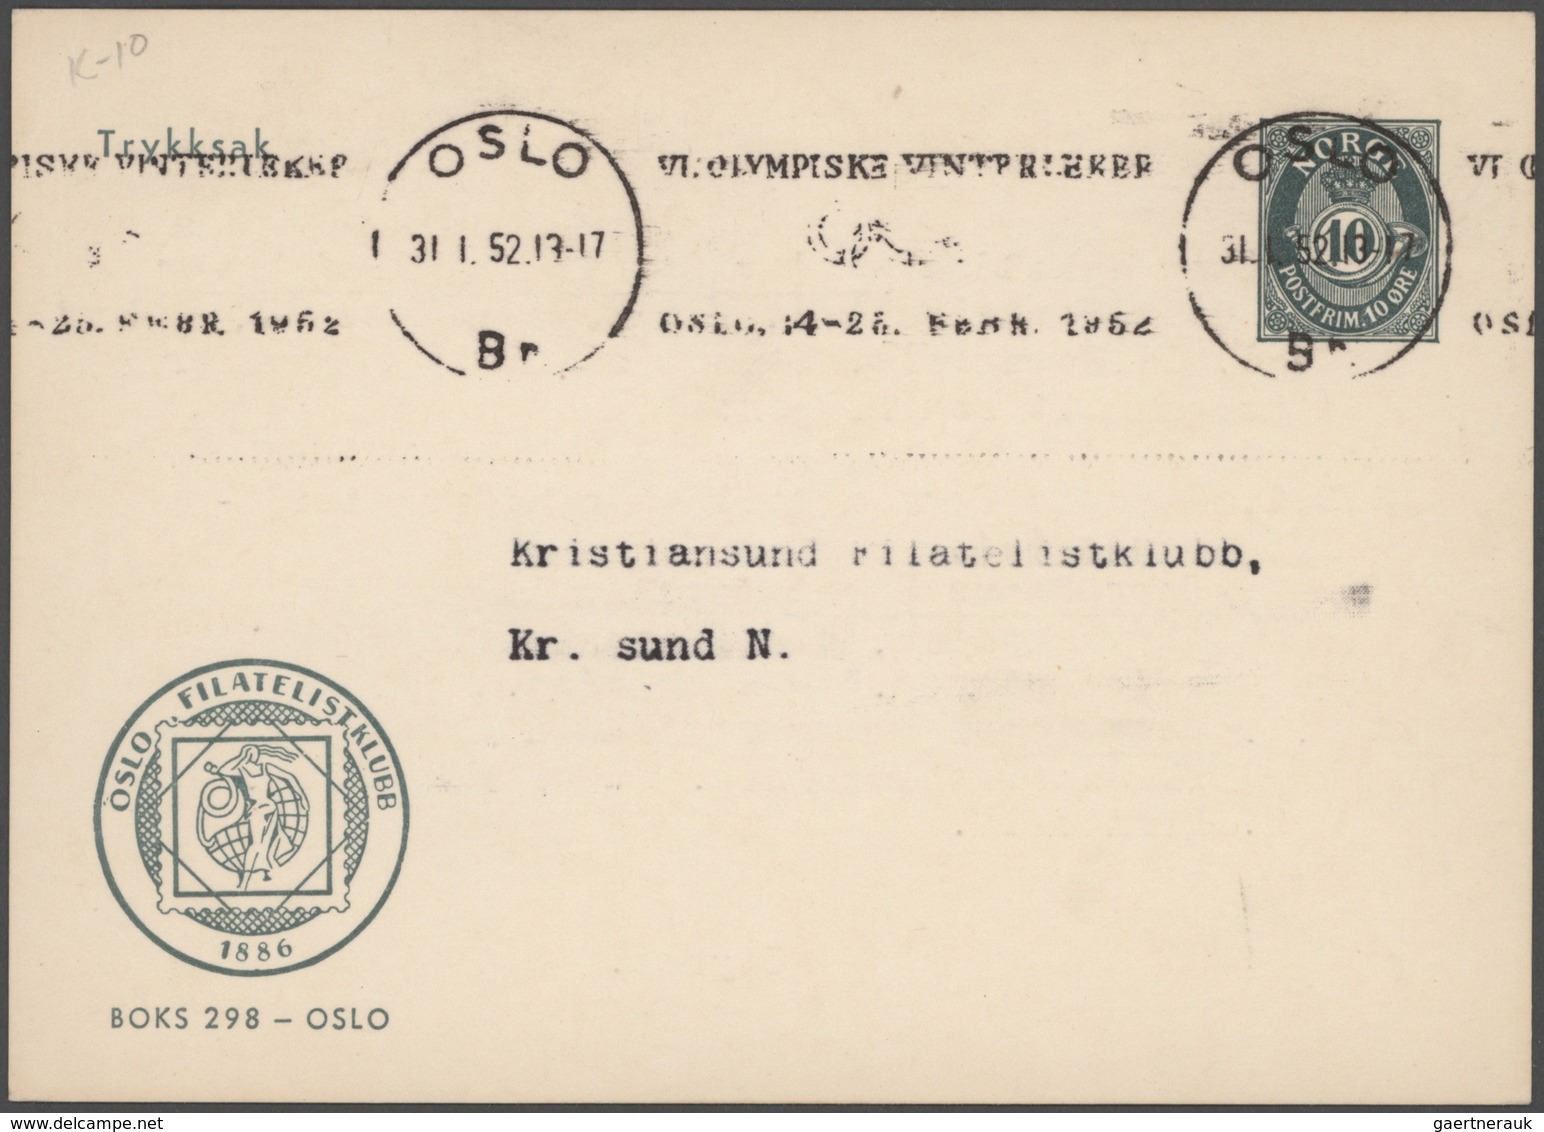 Norwegen - Ganzsachen: 1872/1999 holding of ca. 490 unused/CTO-used and commercially used postal sta